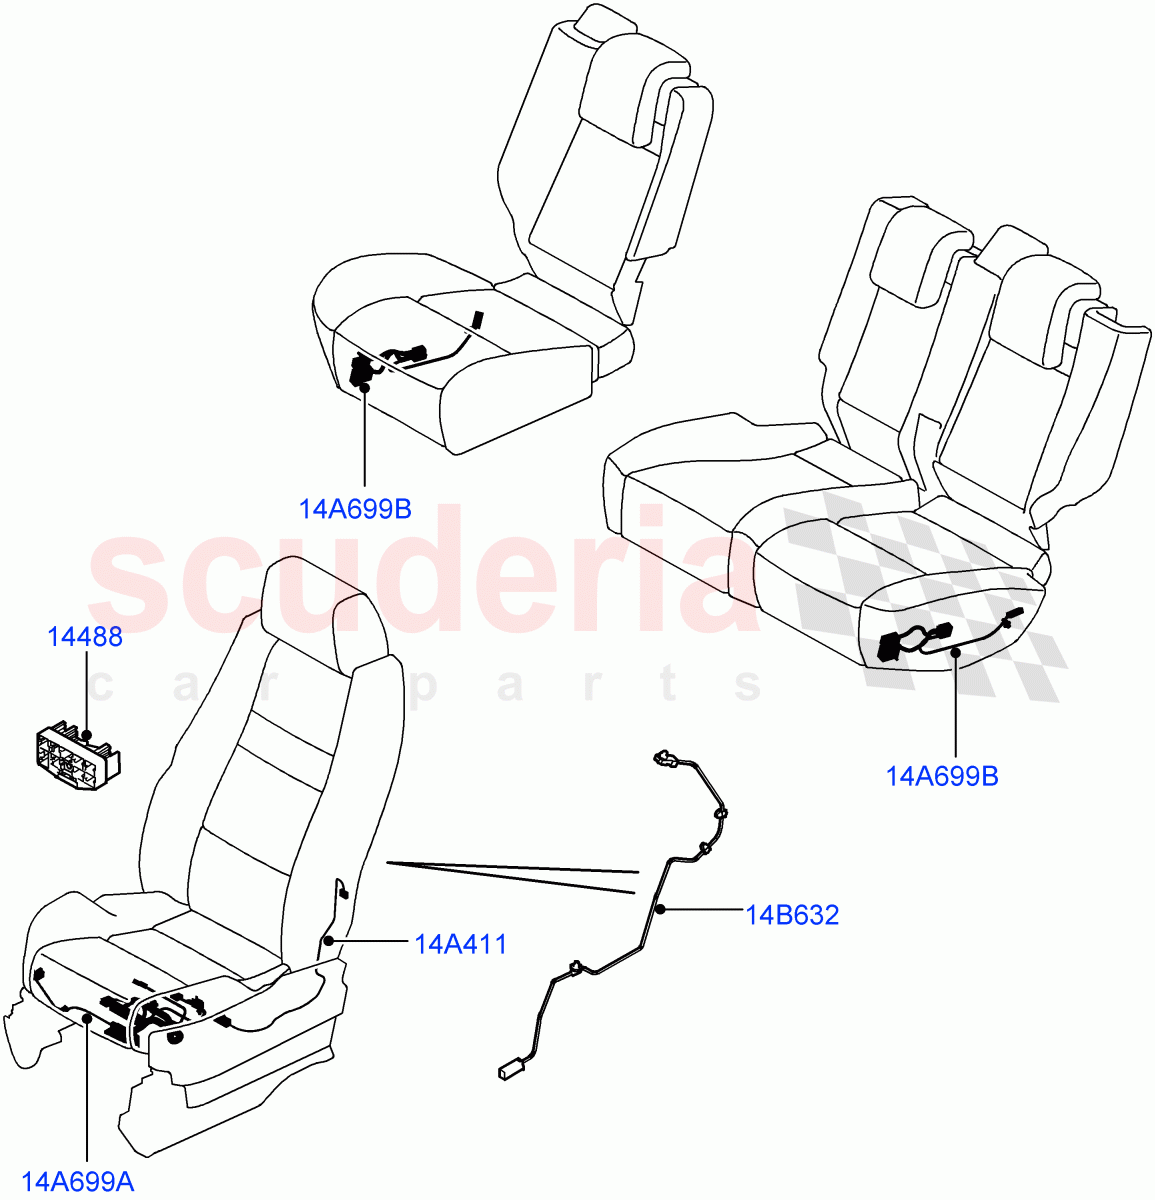 Electrical Wiring - Body And Rear(Seats)((V)TO9A999999) of Land Rover Land Rover Range Rover Sport (2005-2009) [4.4 AJ Petrol V8]